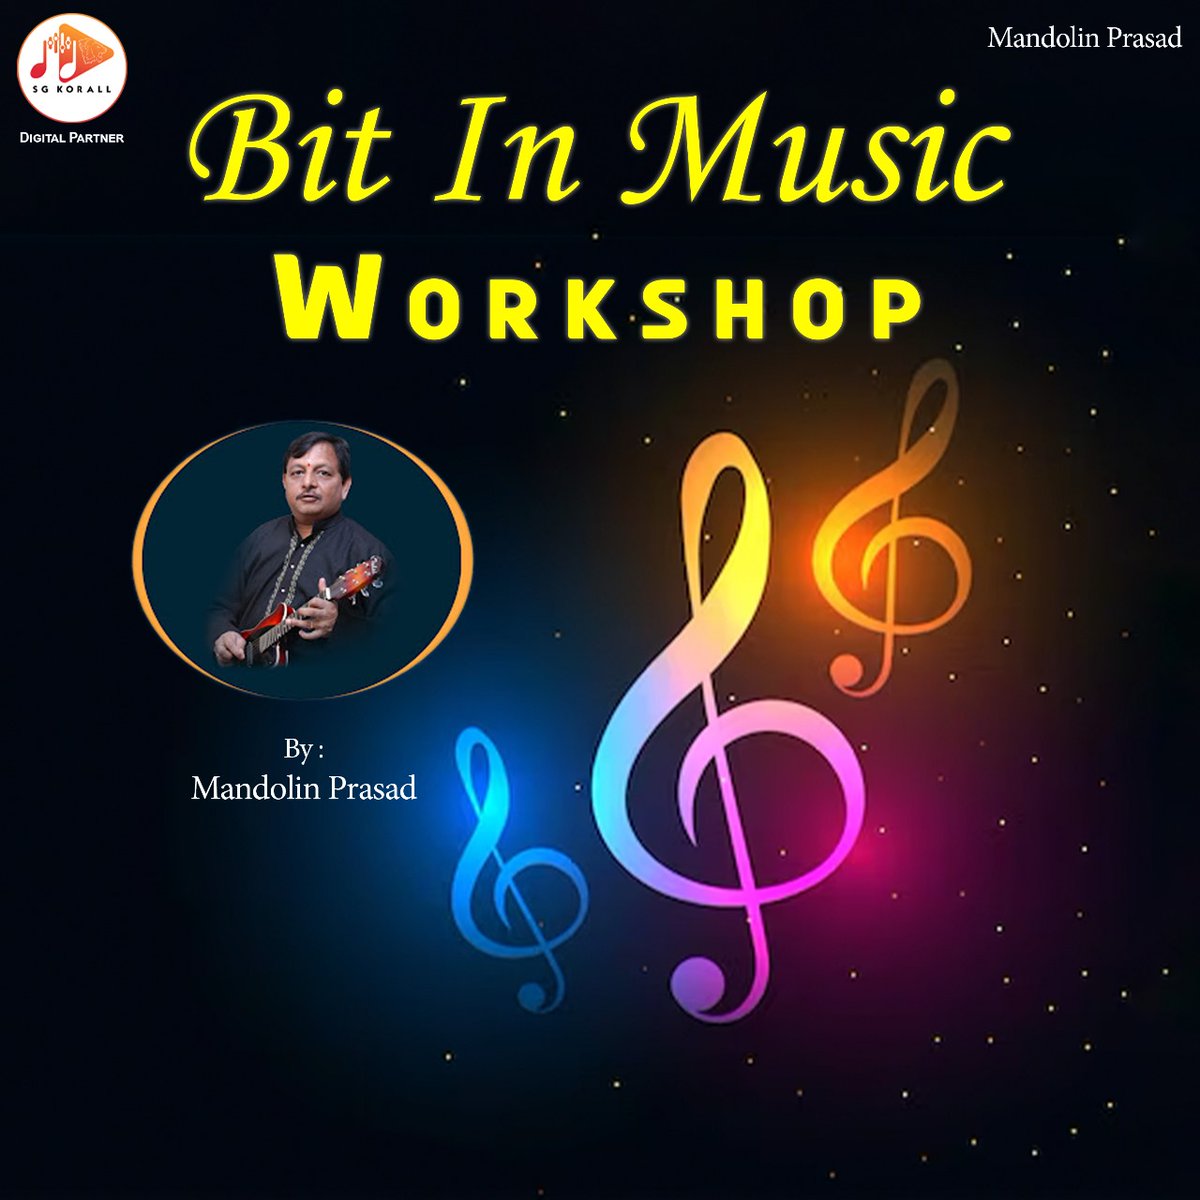 🎼Bit In Music Workshop🎼

Watch Now : youtu.be/9J6Dy7pKxt8

MELODIES BY MANDOLIN PRASAD🎼

#musiclessons #pianolessons #piano #musicteacher #musicschool #musician #guitar #guitarlessons #onlinemusiclessons #musiclessonsforkids #violin #violinlessons #drumlessons #singing